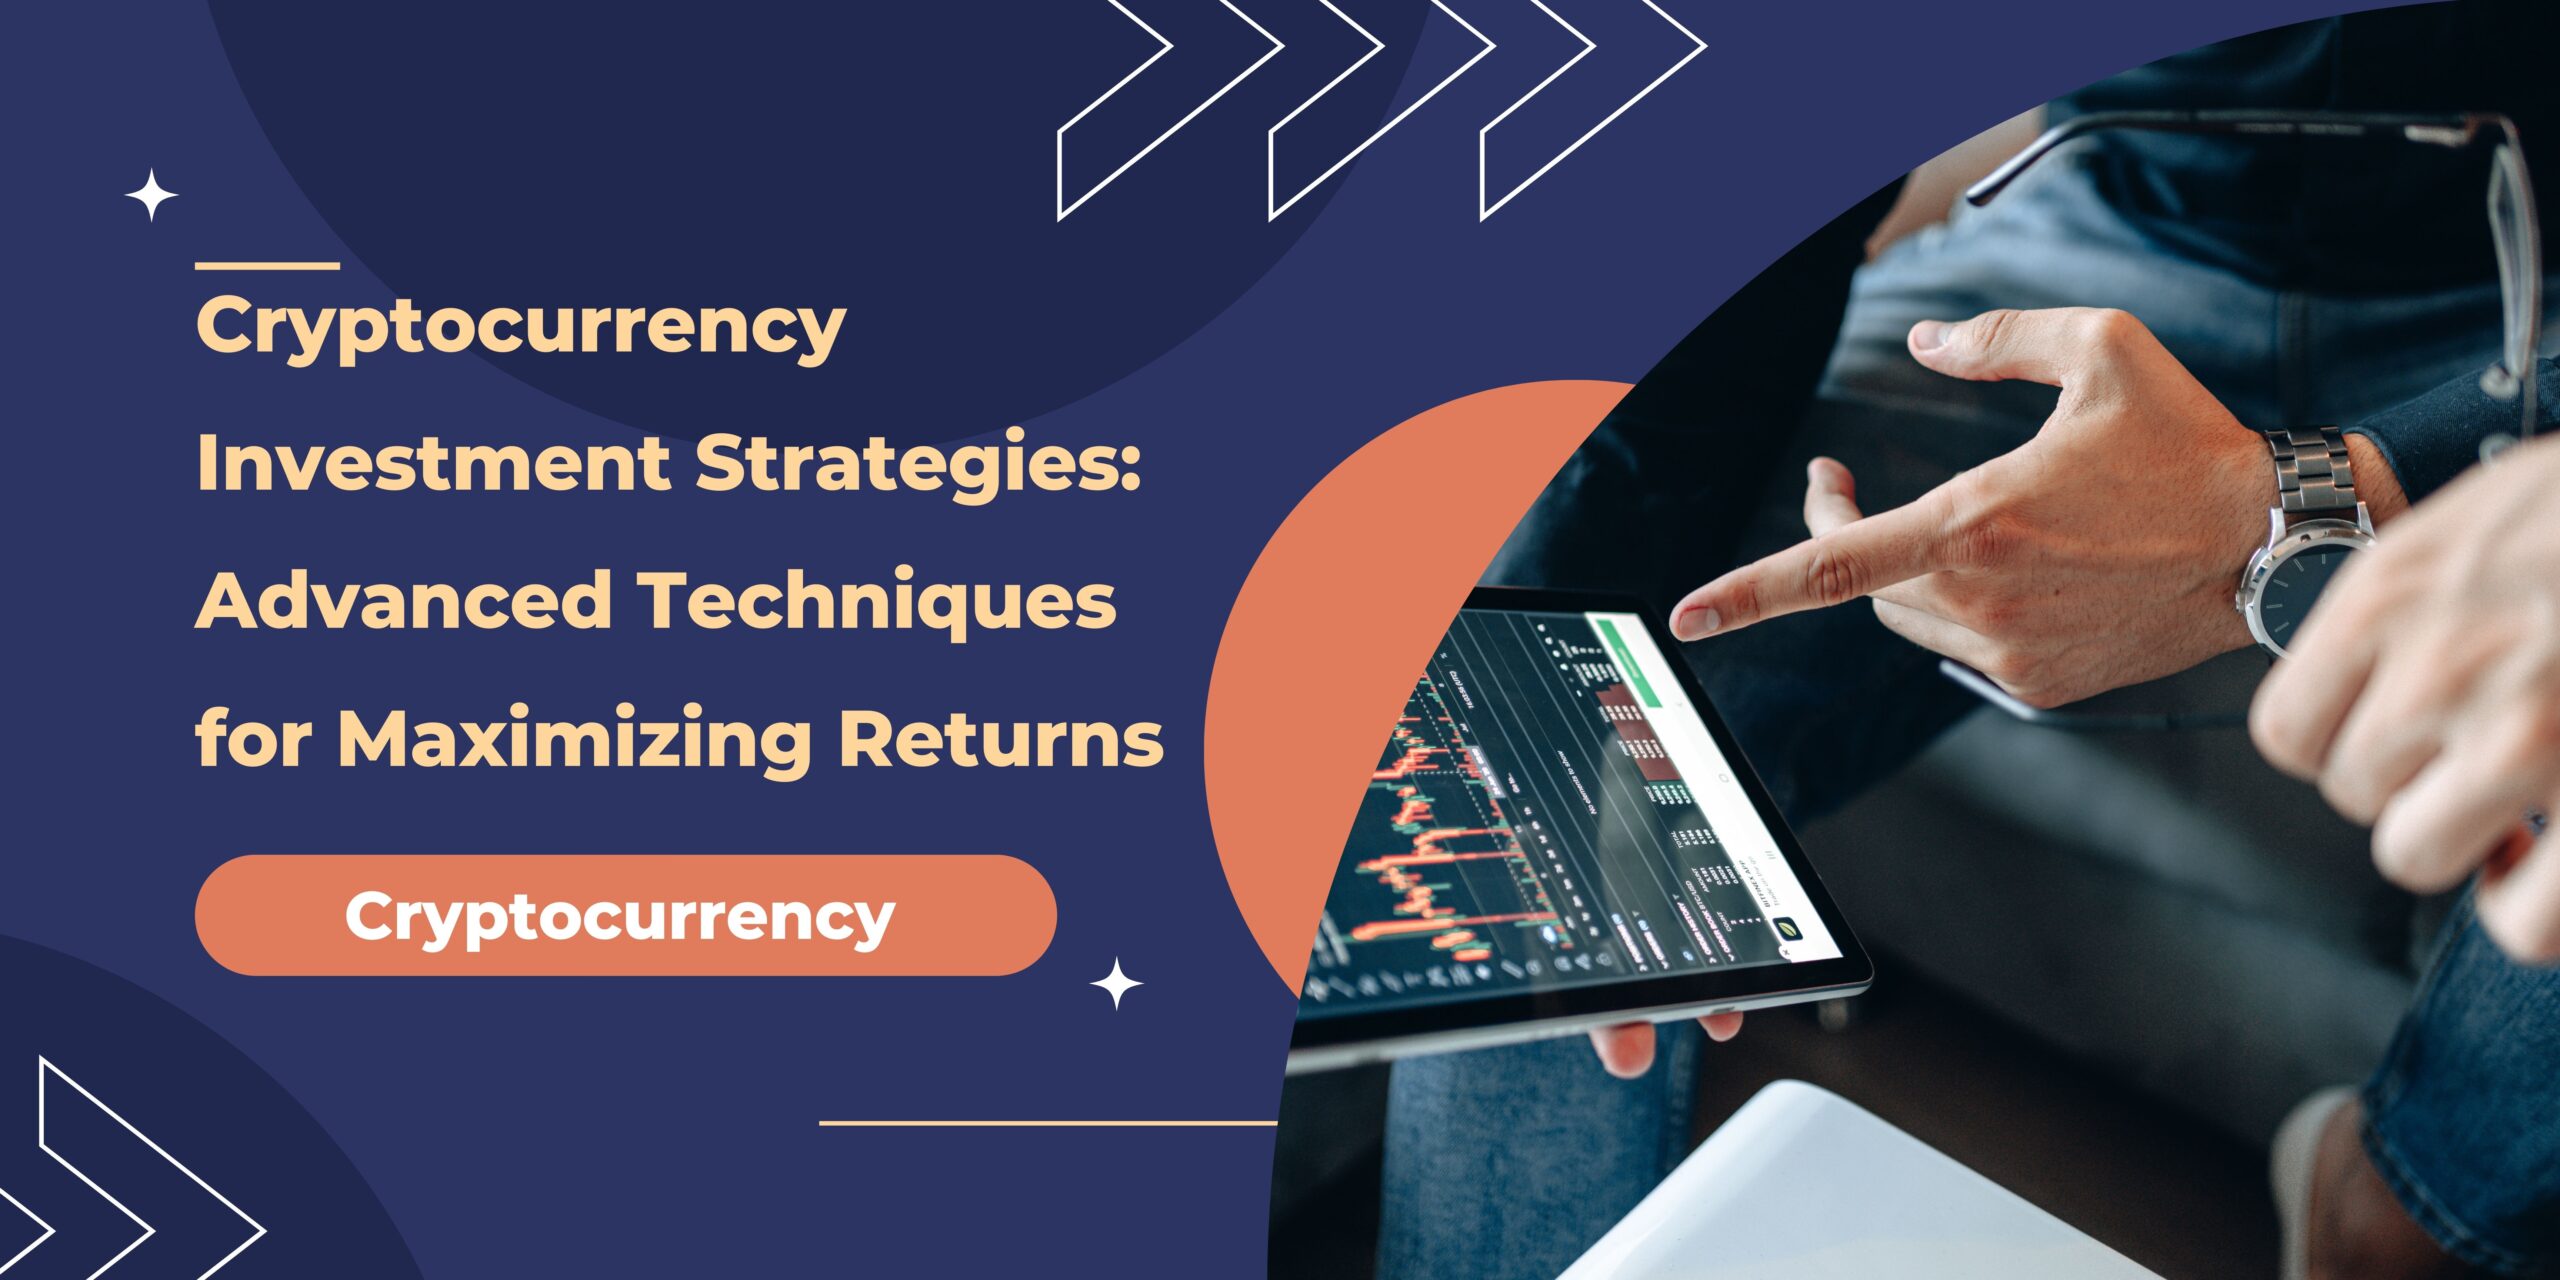 Cryptocurrency Investment Strategies: Advanced Techniques for Maximizing Returns